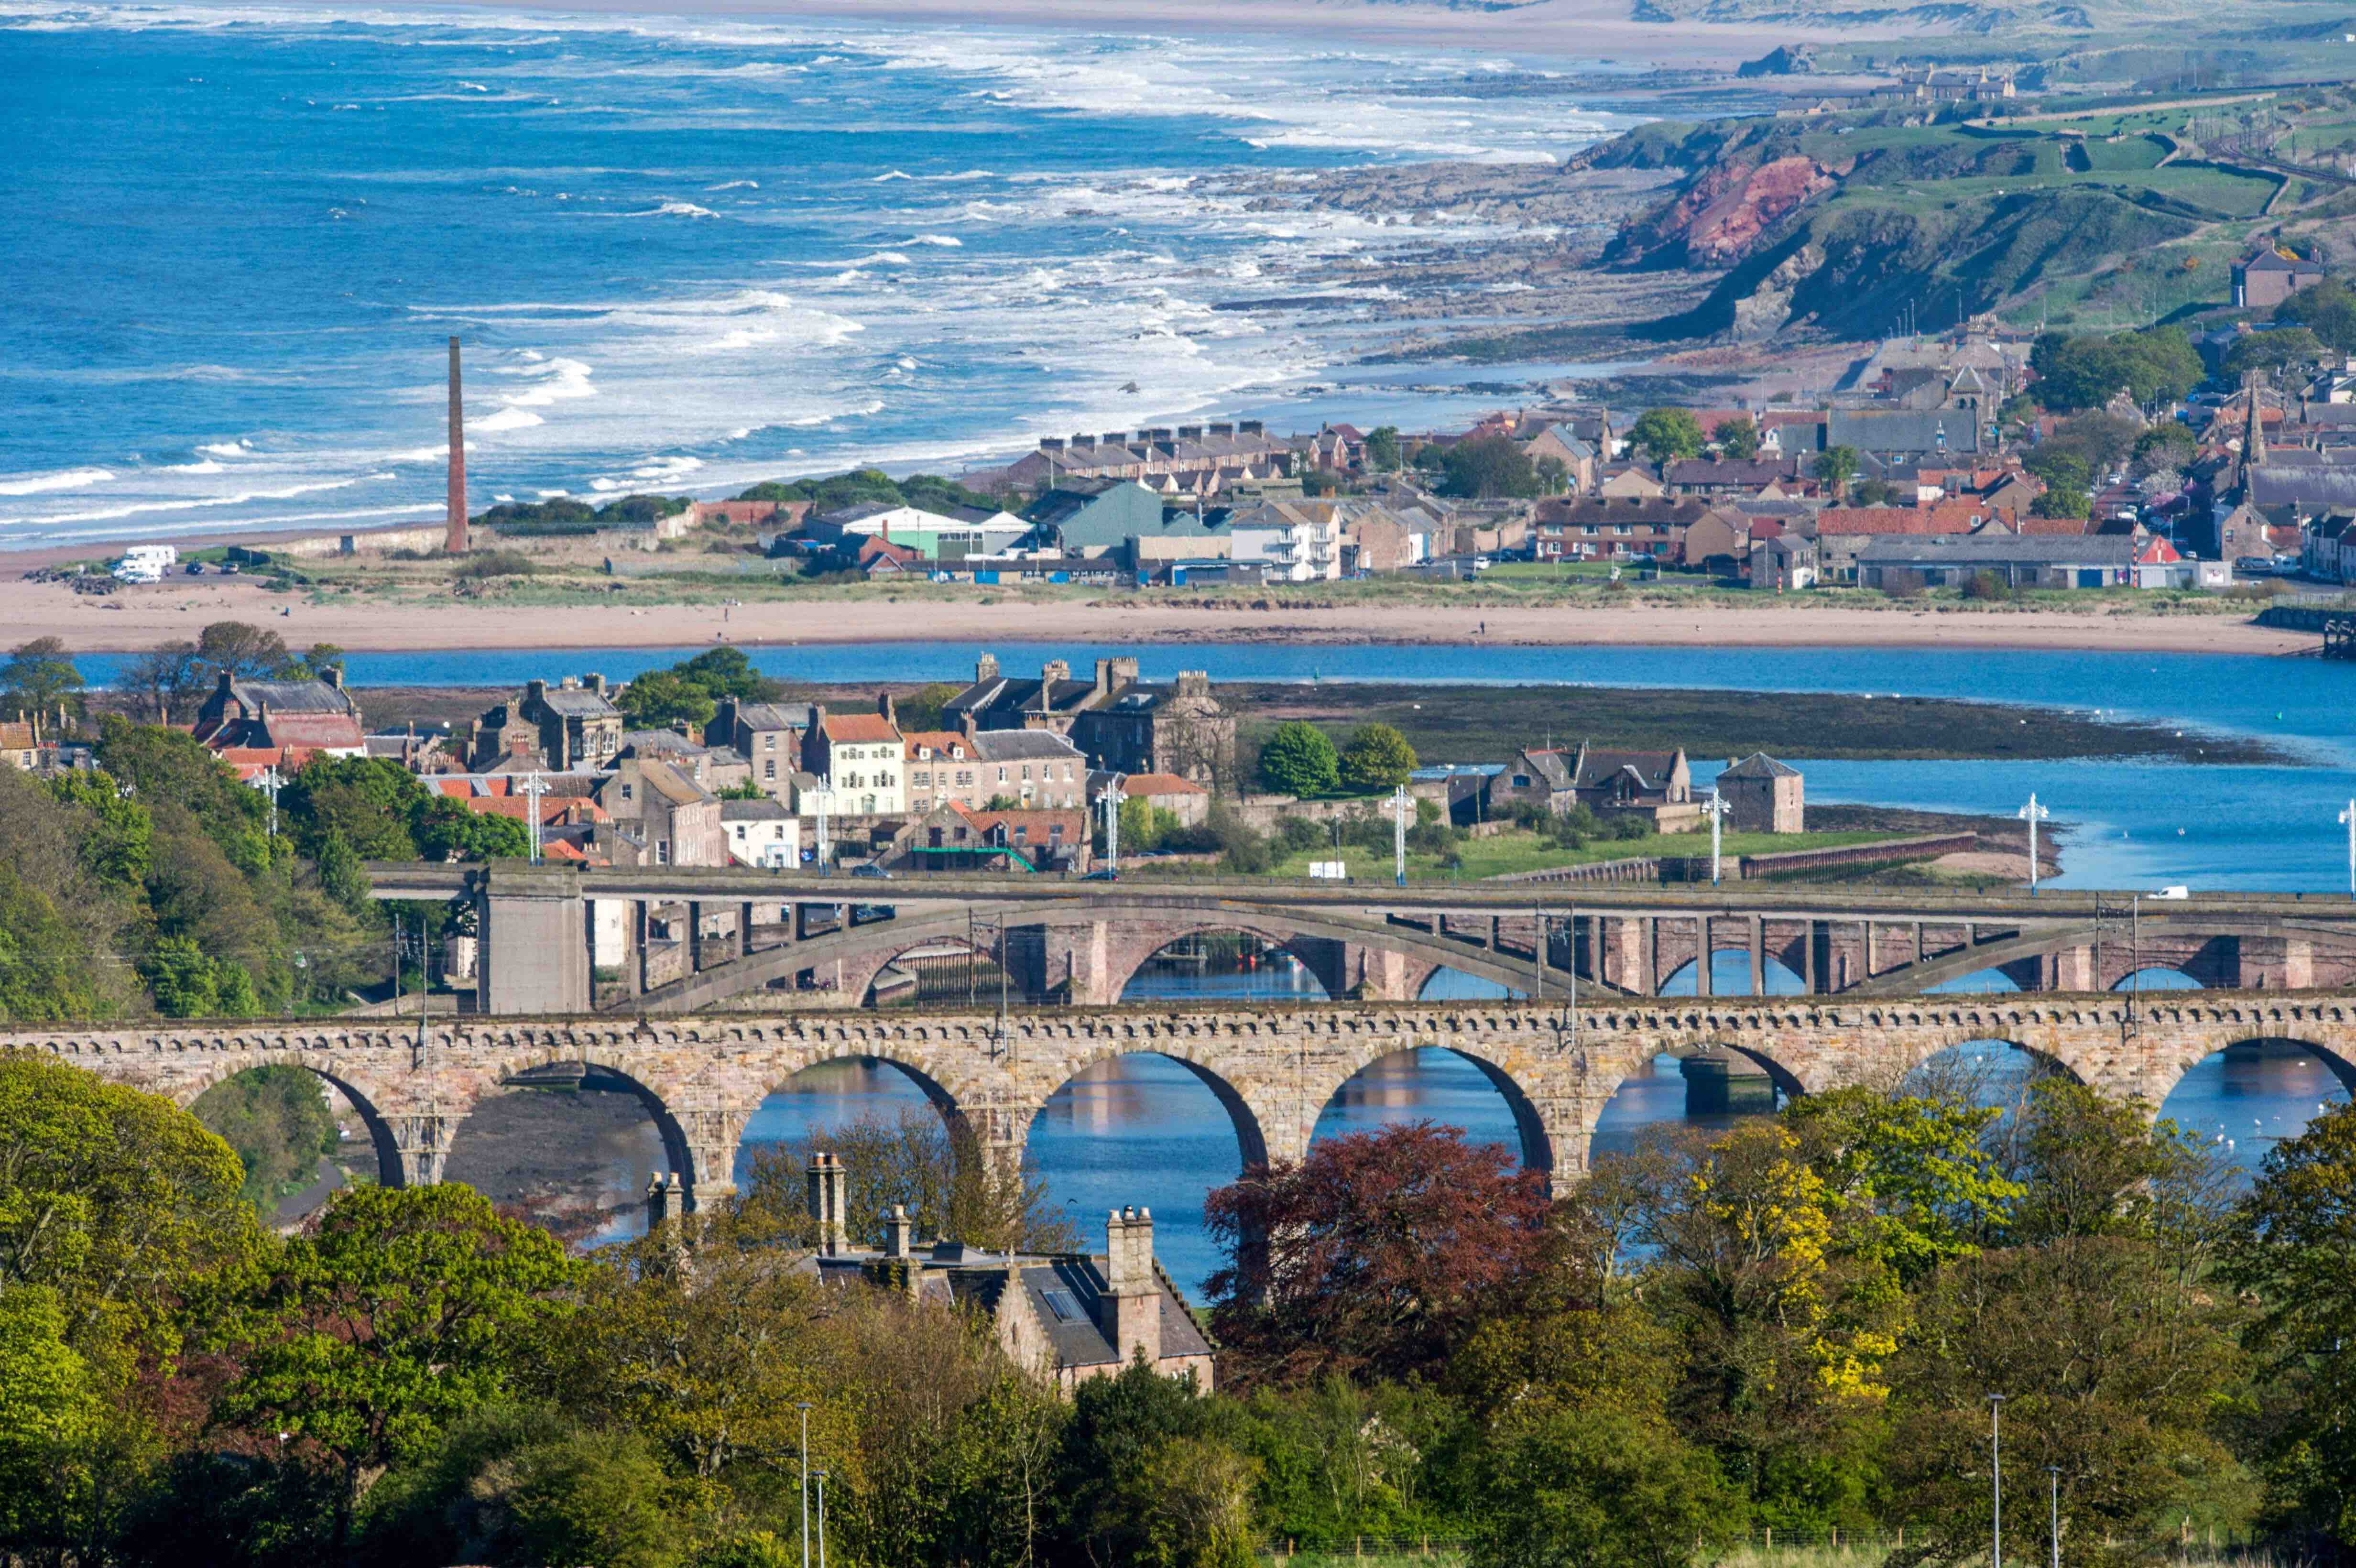 Day Out in Berwick-upon-Tweed, England - A Guide to Visiting Berwick